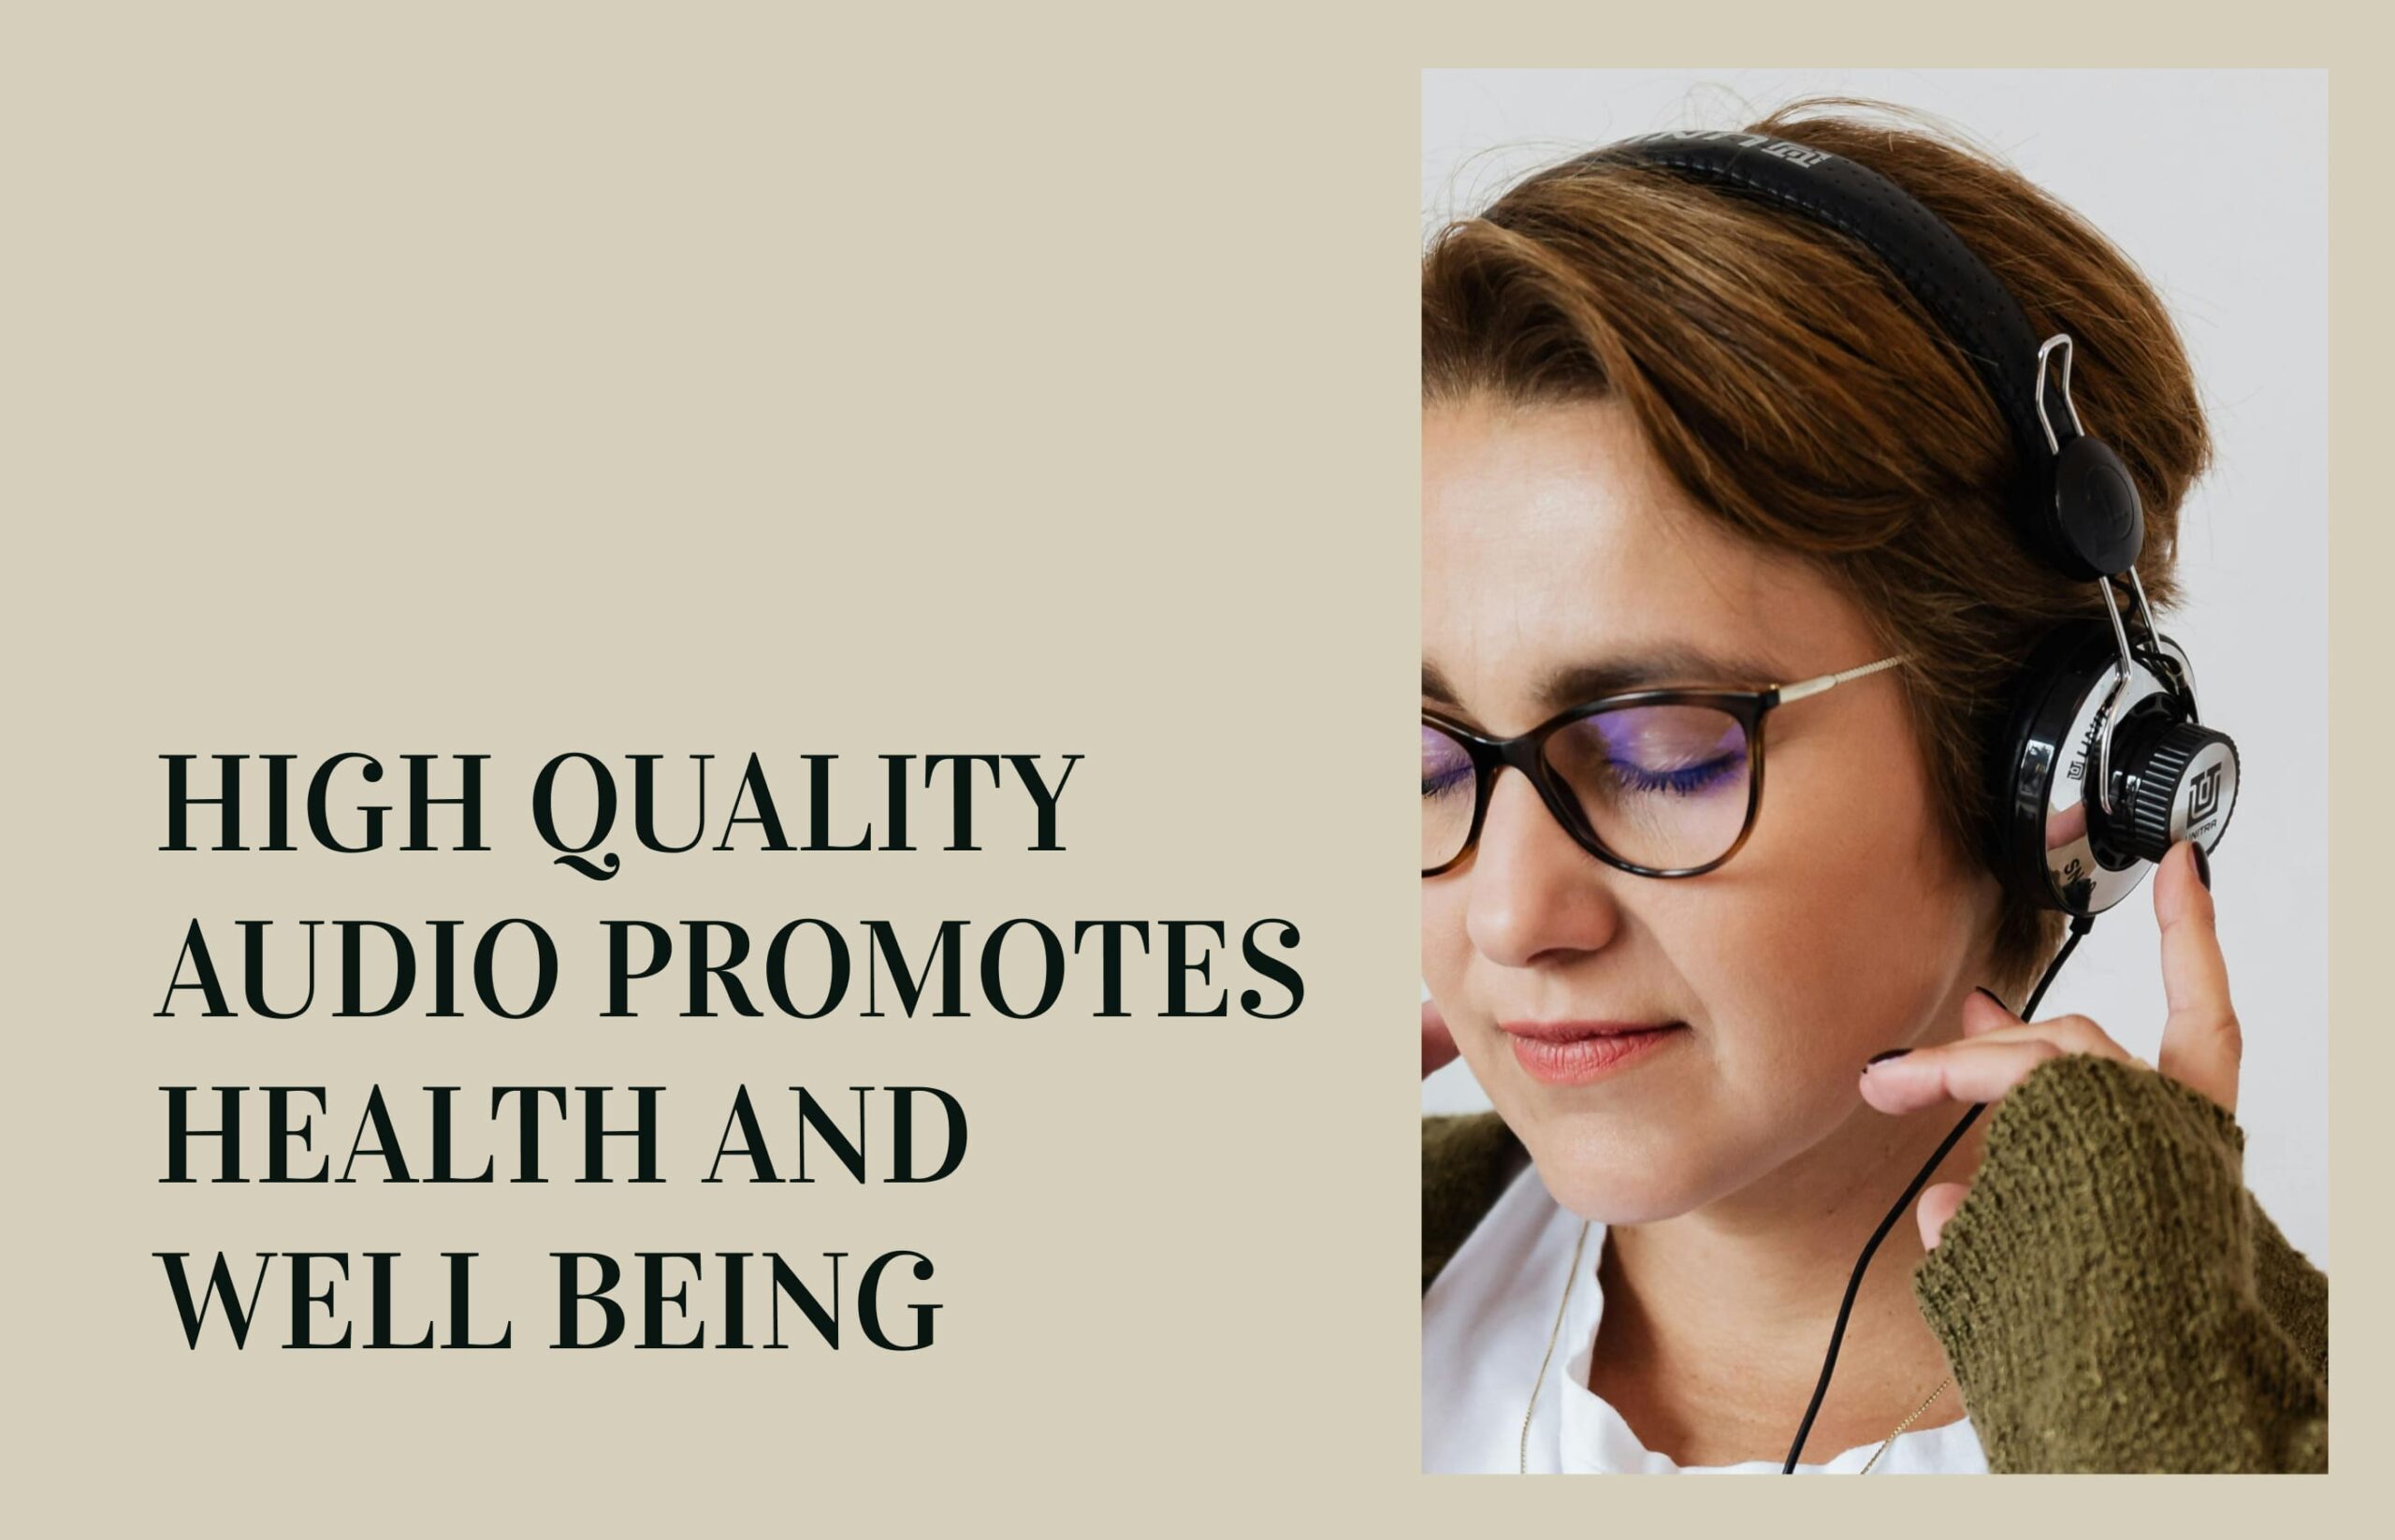 High Quality Audio Promotes Health and Well being